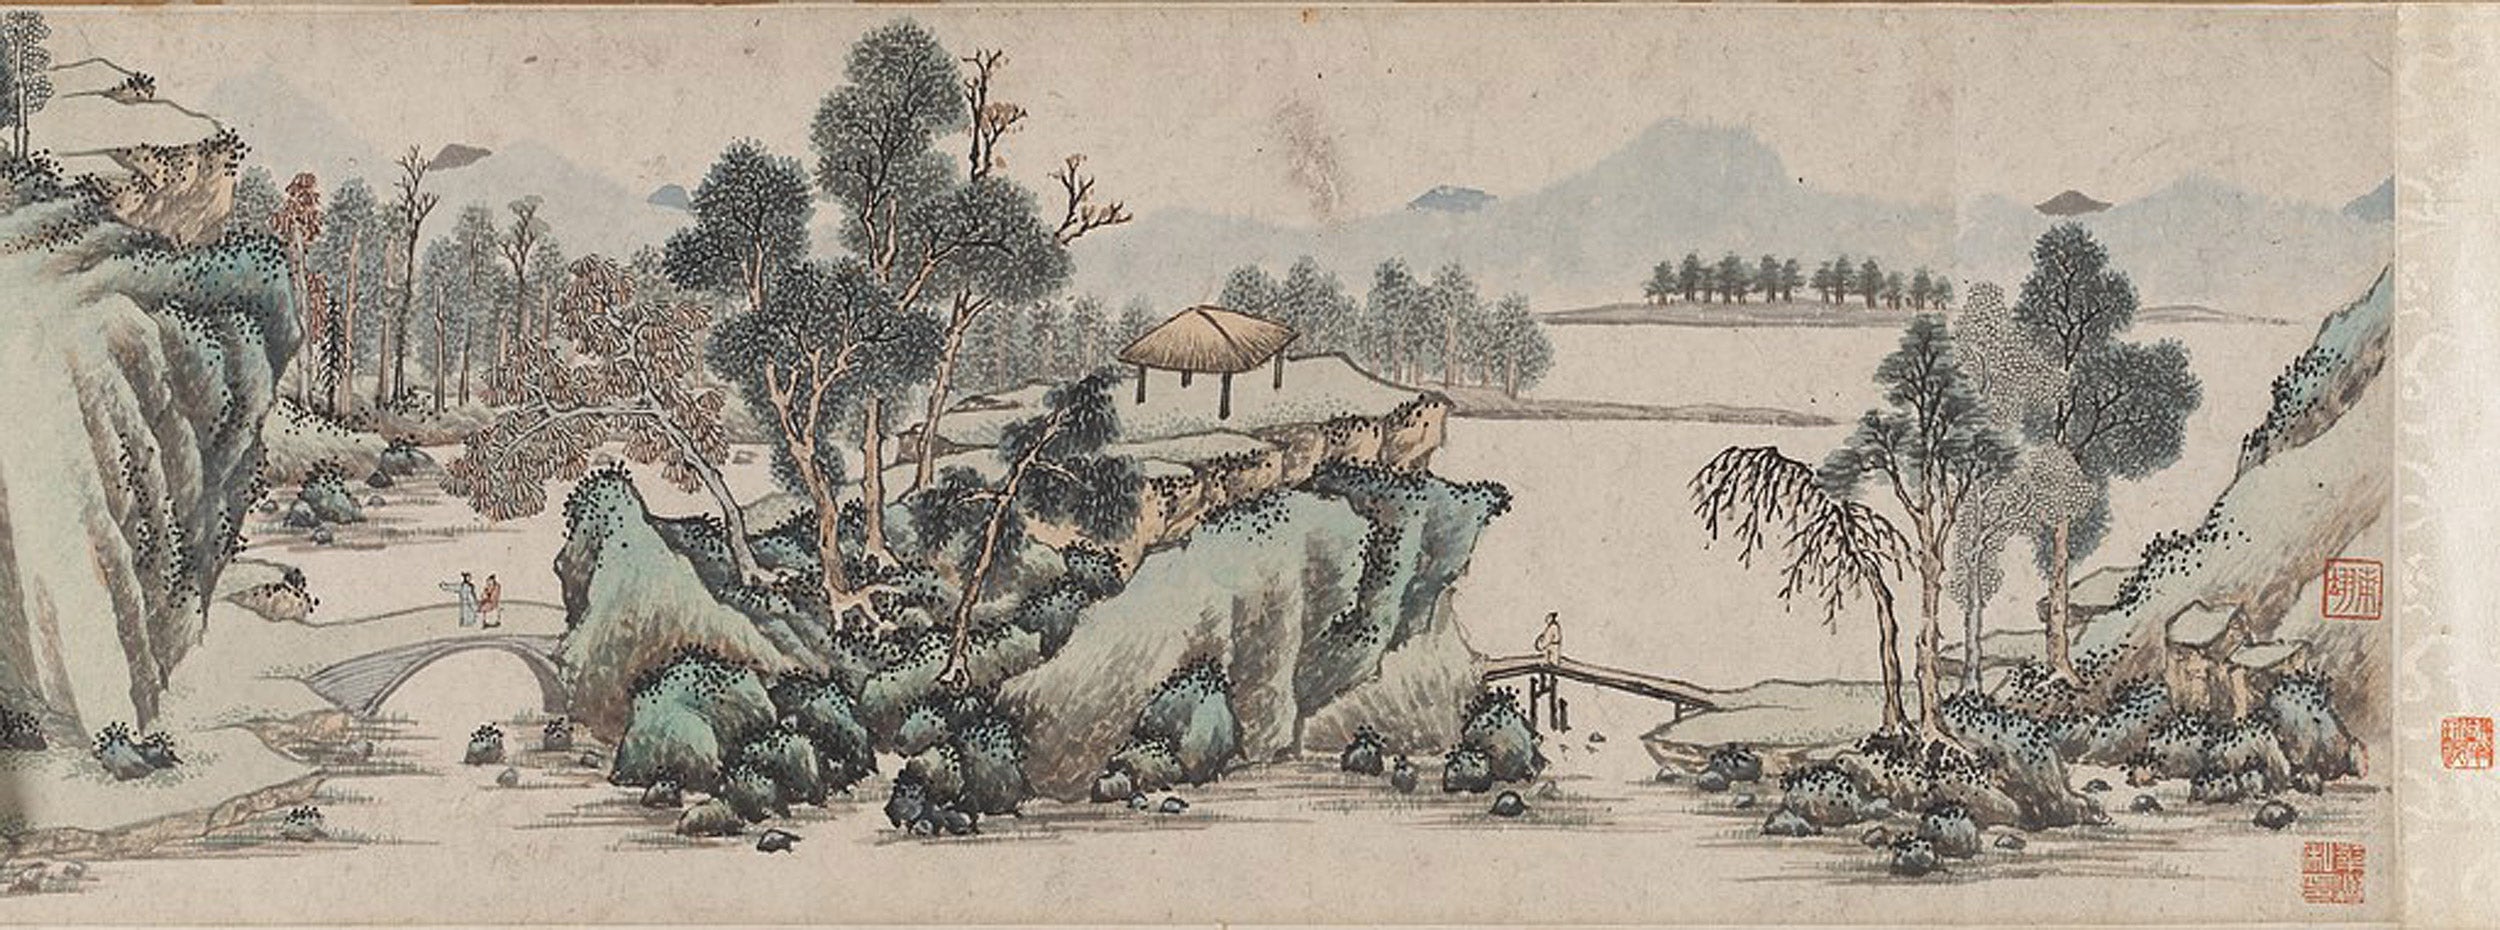 "Landscape with Mountain Village" by Wen Zhengming.